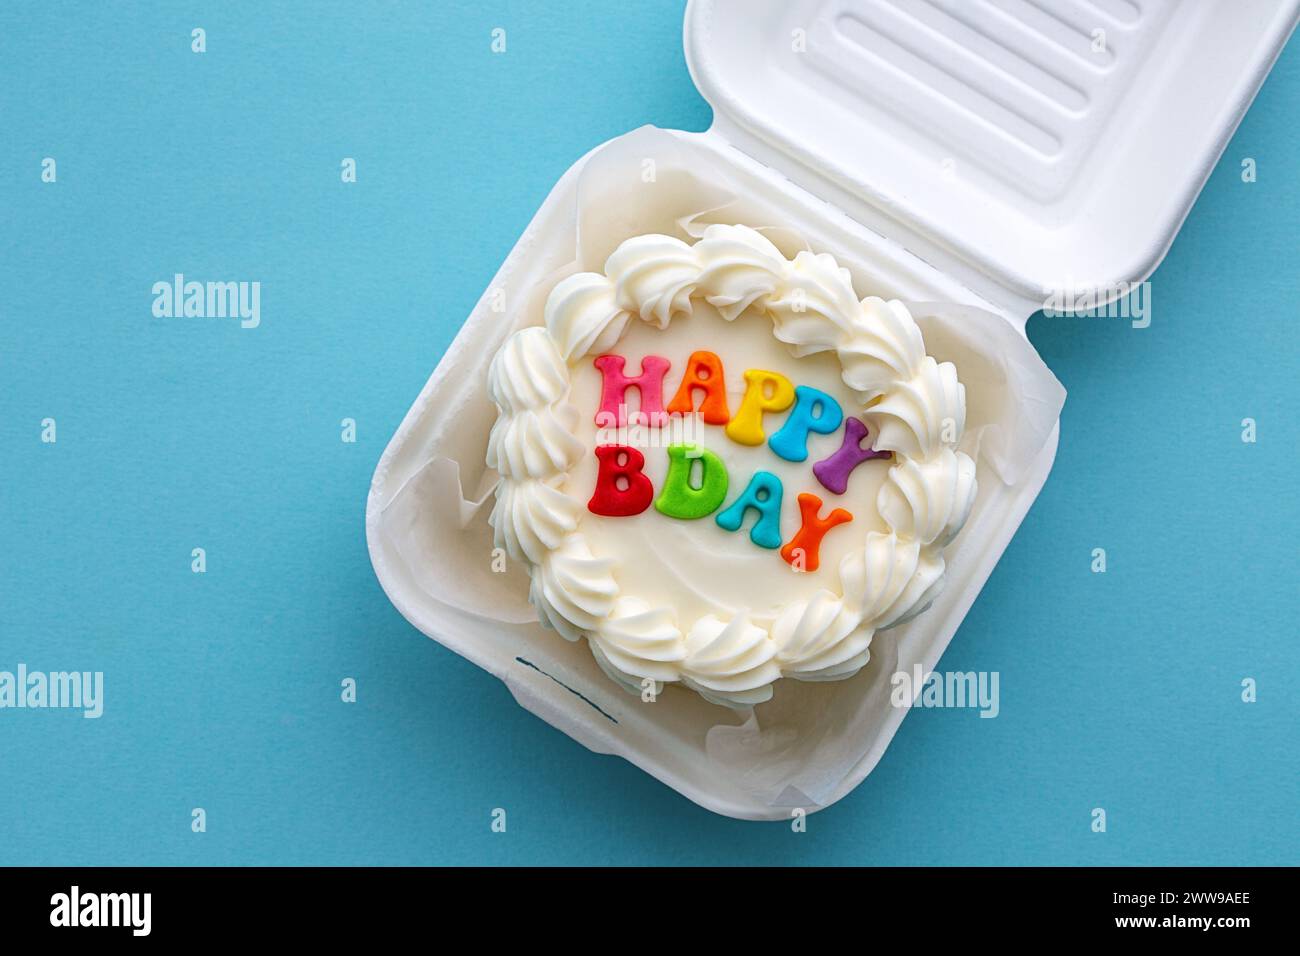 Mini birthday cake with colorful happy birthday message in a cardboard lunch box Stock Photo